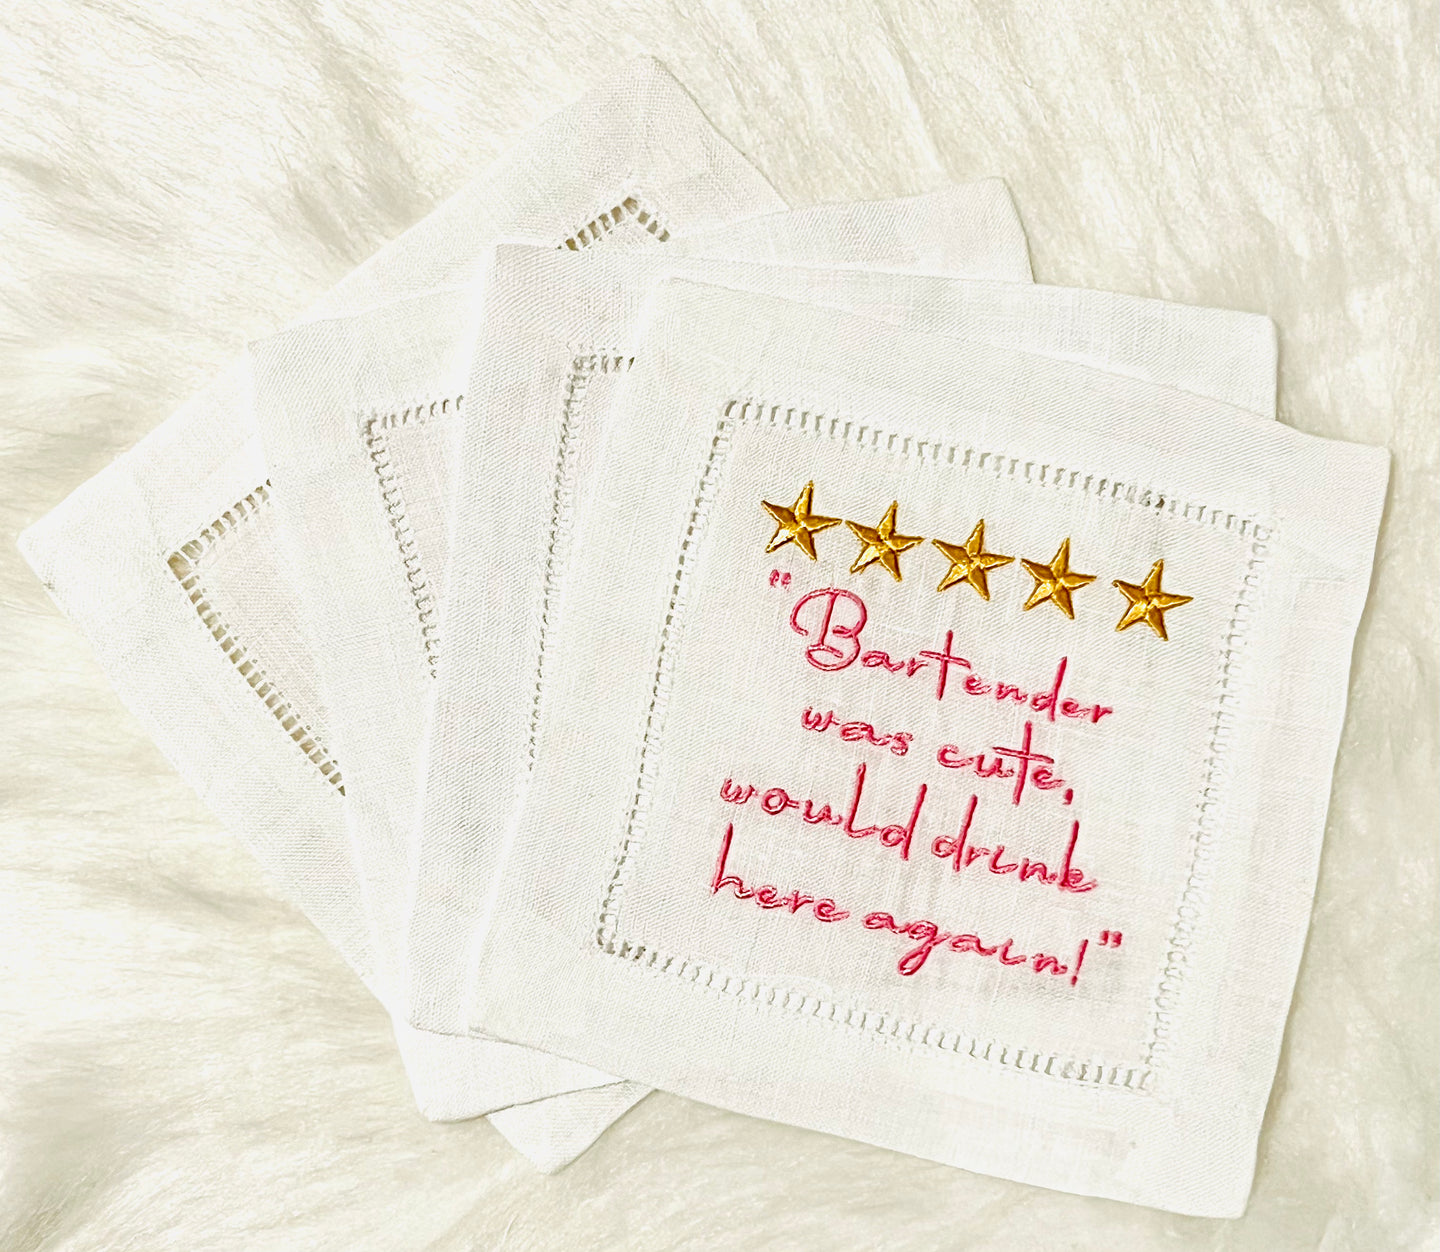 Bartender was Cute Embroidered Cocktail Napkins